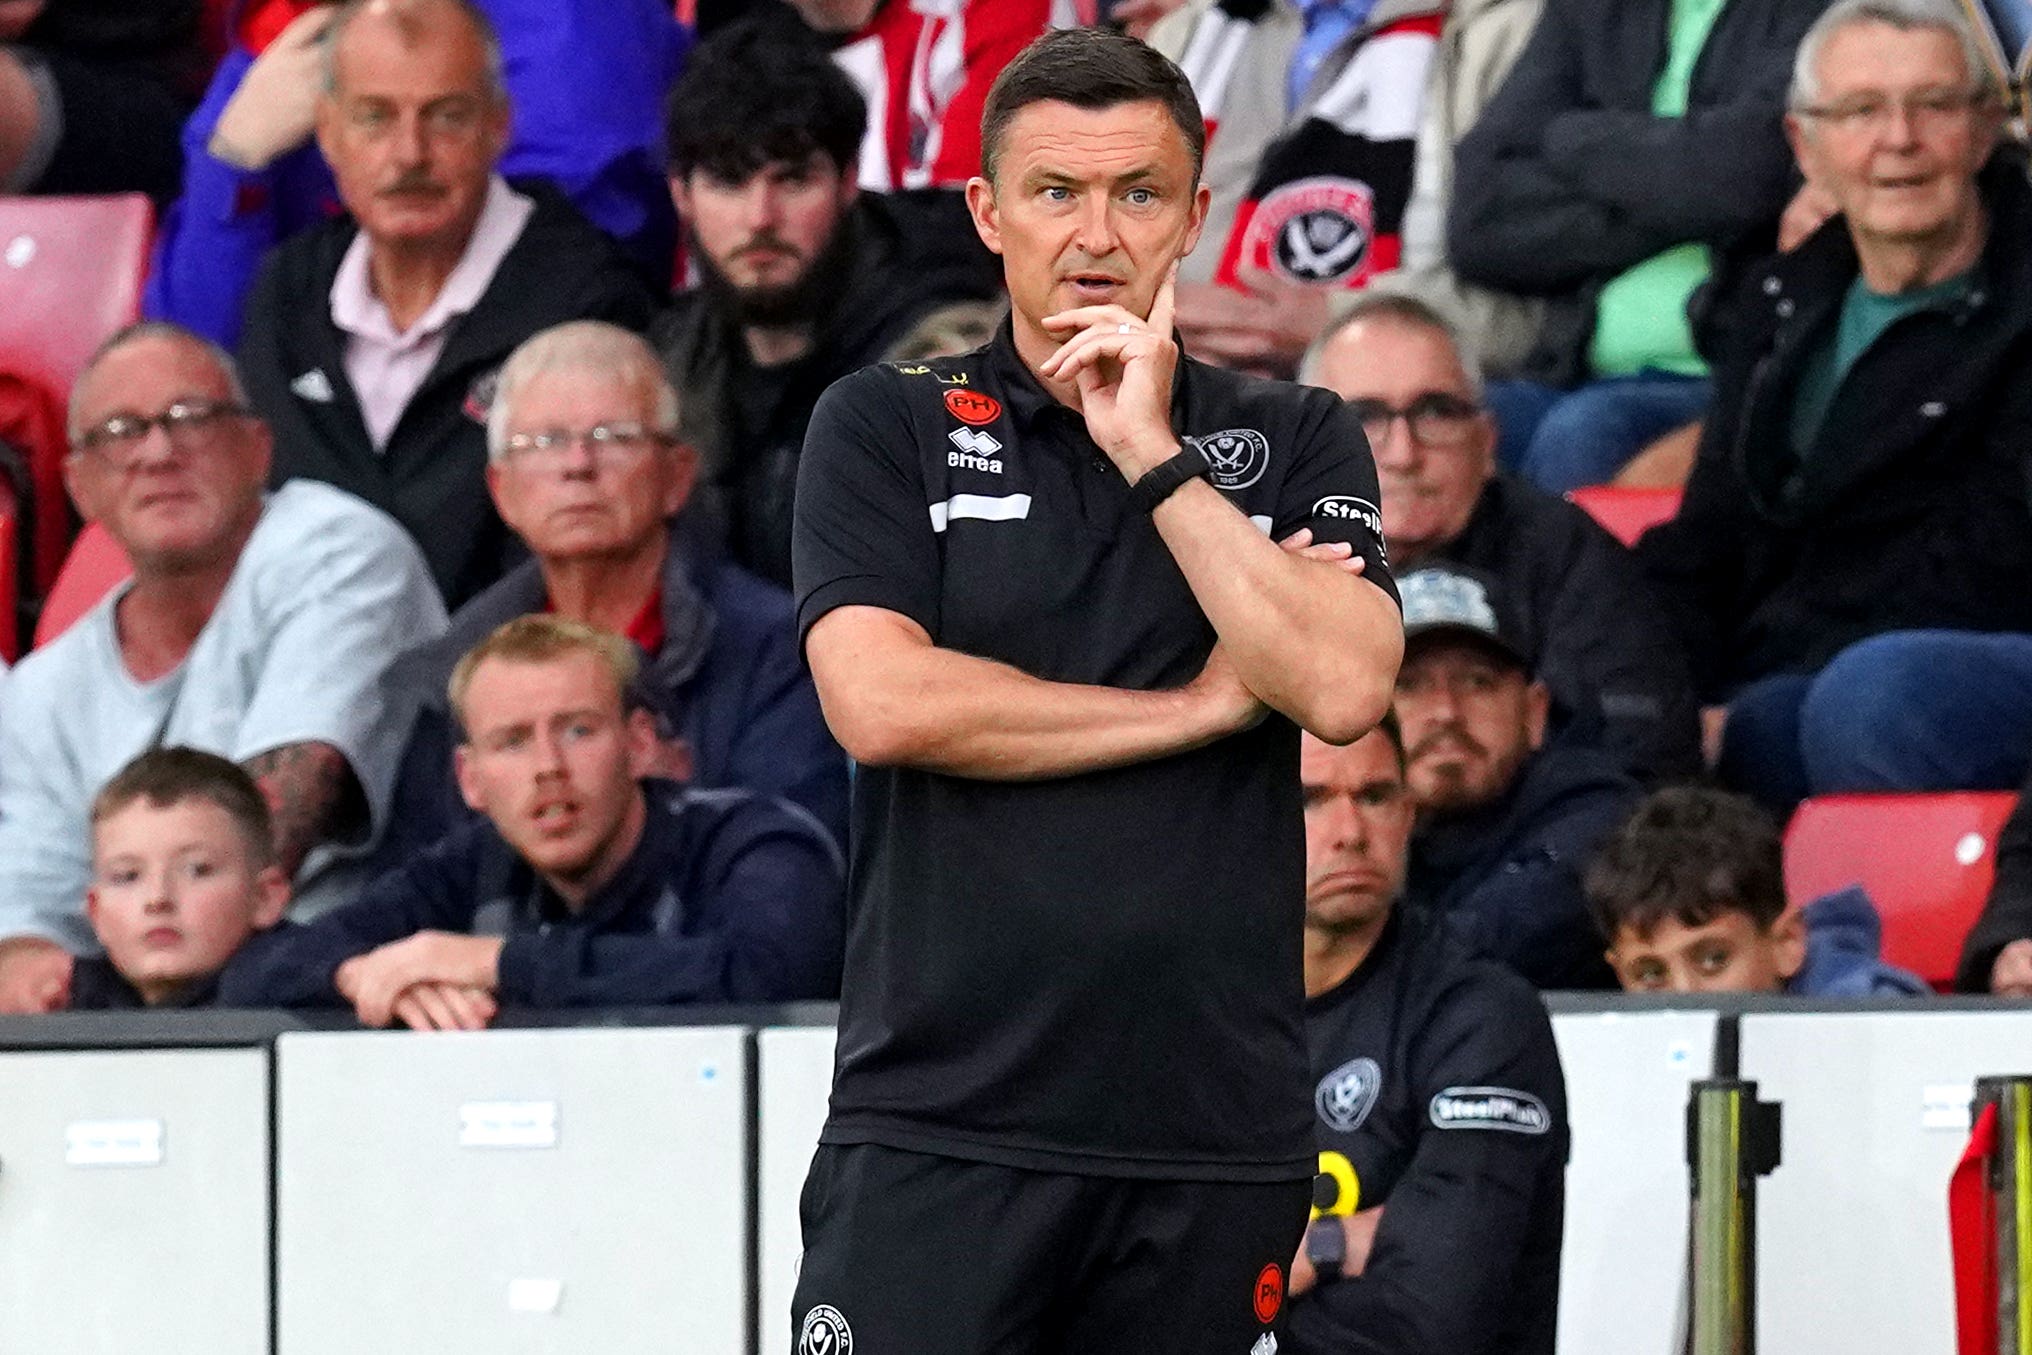 Paul Heckingbottom has been sacked by Sheffield United after two years in charge